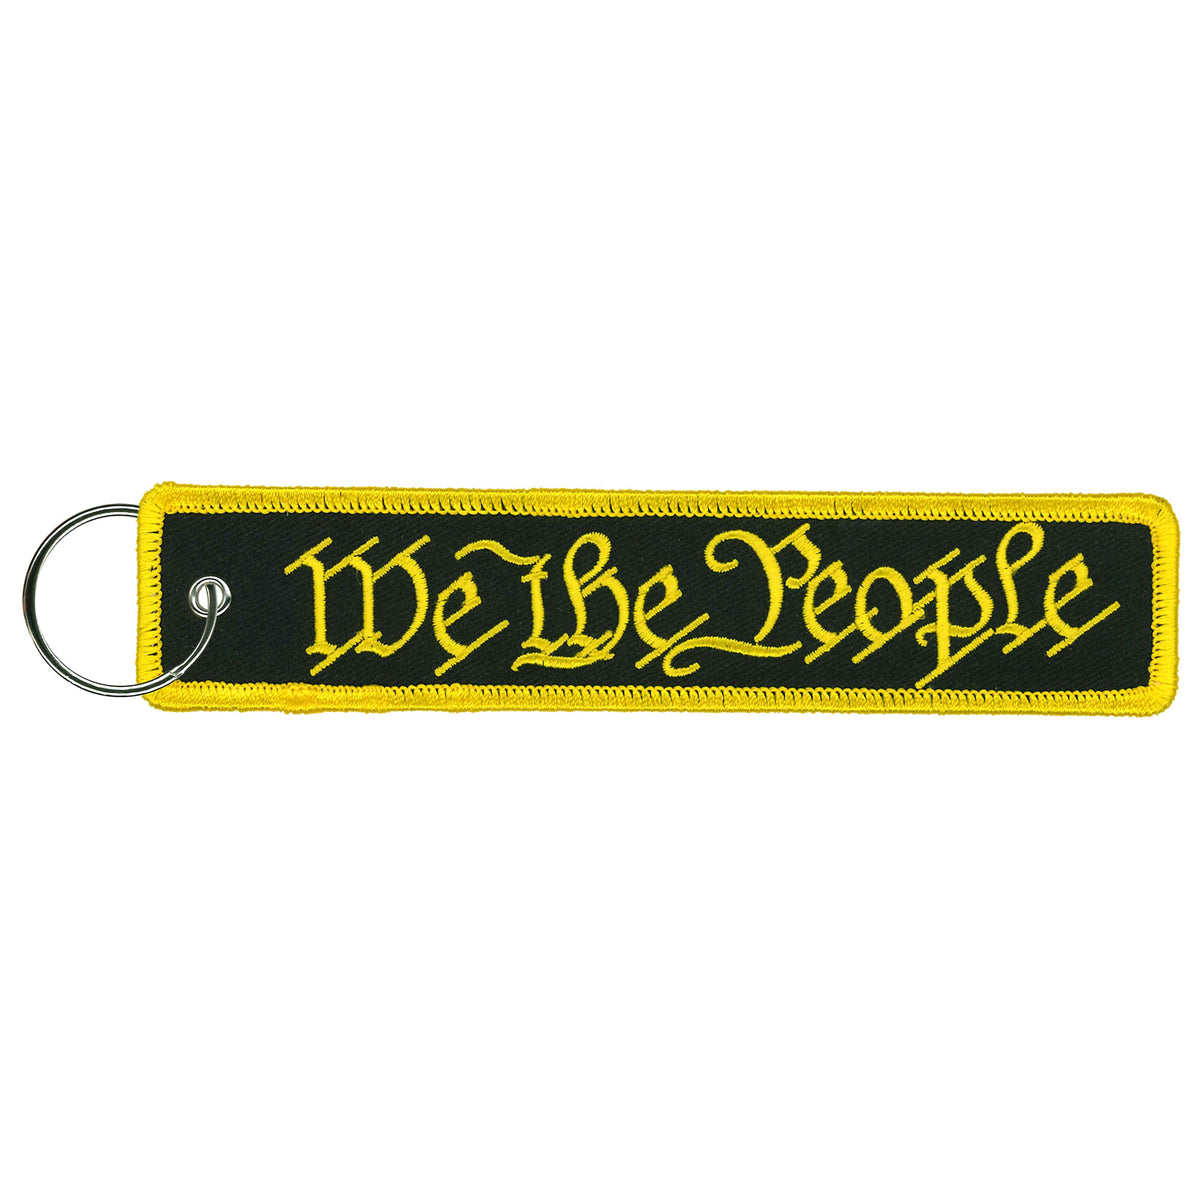 Hot Leathers We The People Key Chain Fob